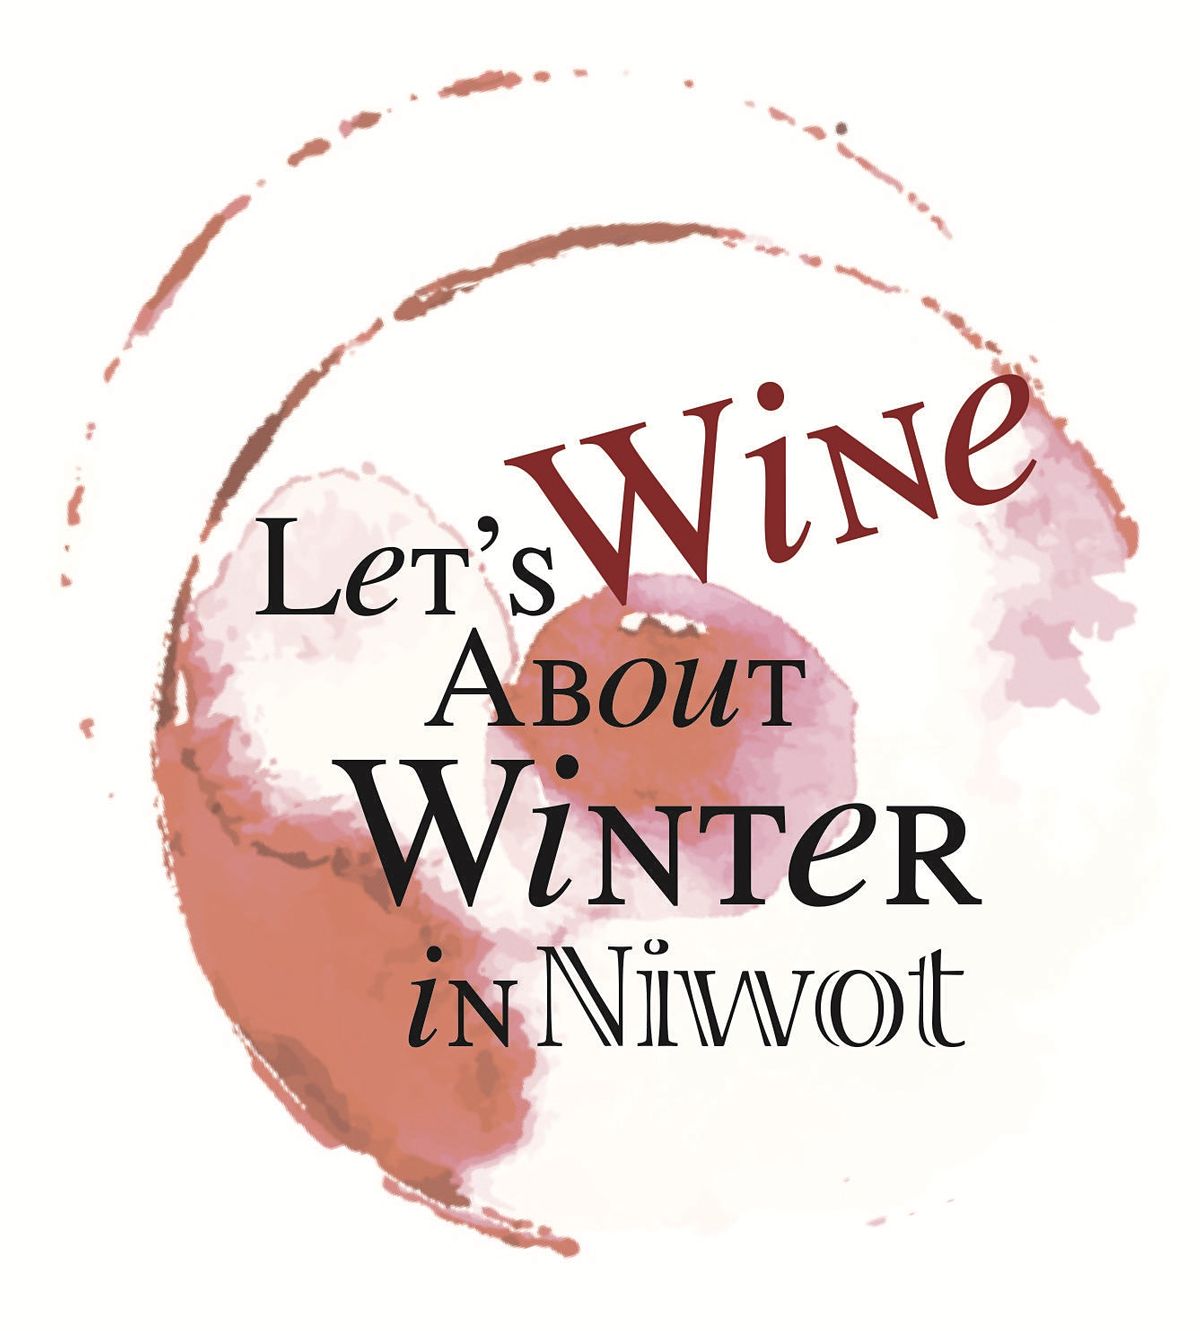 Let's Wine About Winter In Niwot 2022